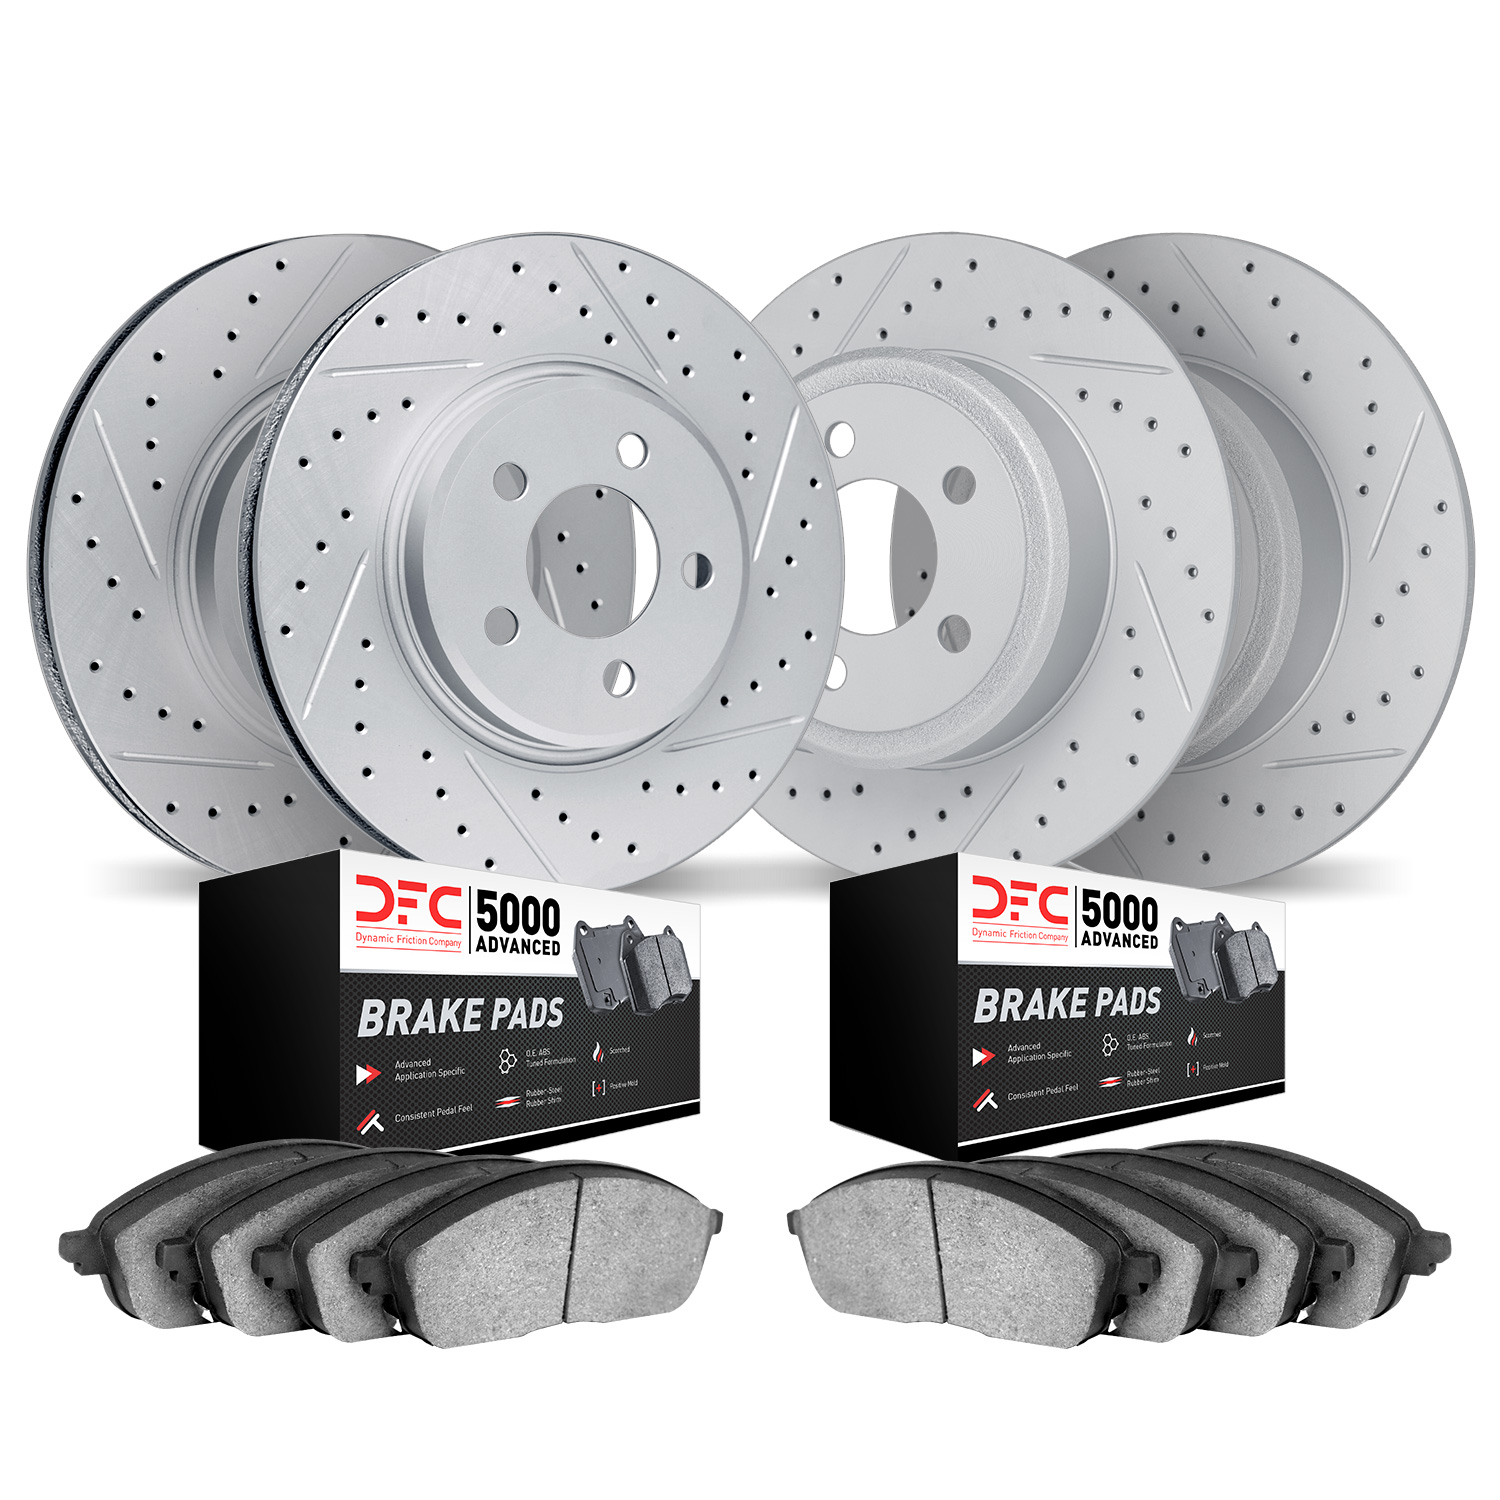 2504-42057 Geoperformance Drilled/Slotted Rotors w/5000 Advanced Brake Pads Kit, 2005-2010 Mopar, Position: Front and Rear